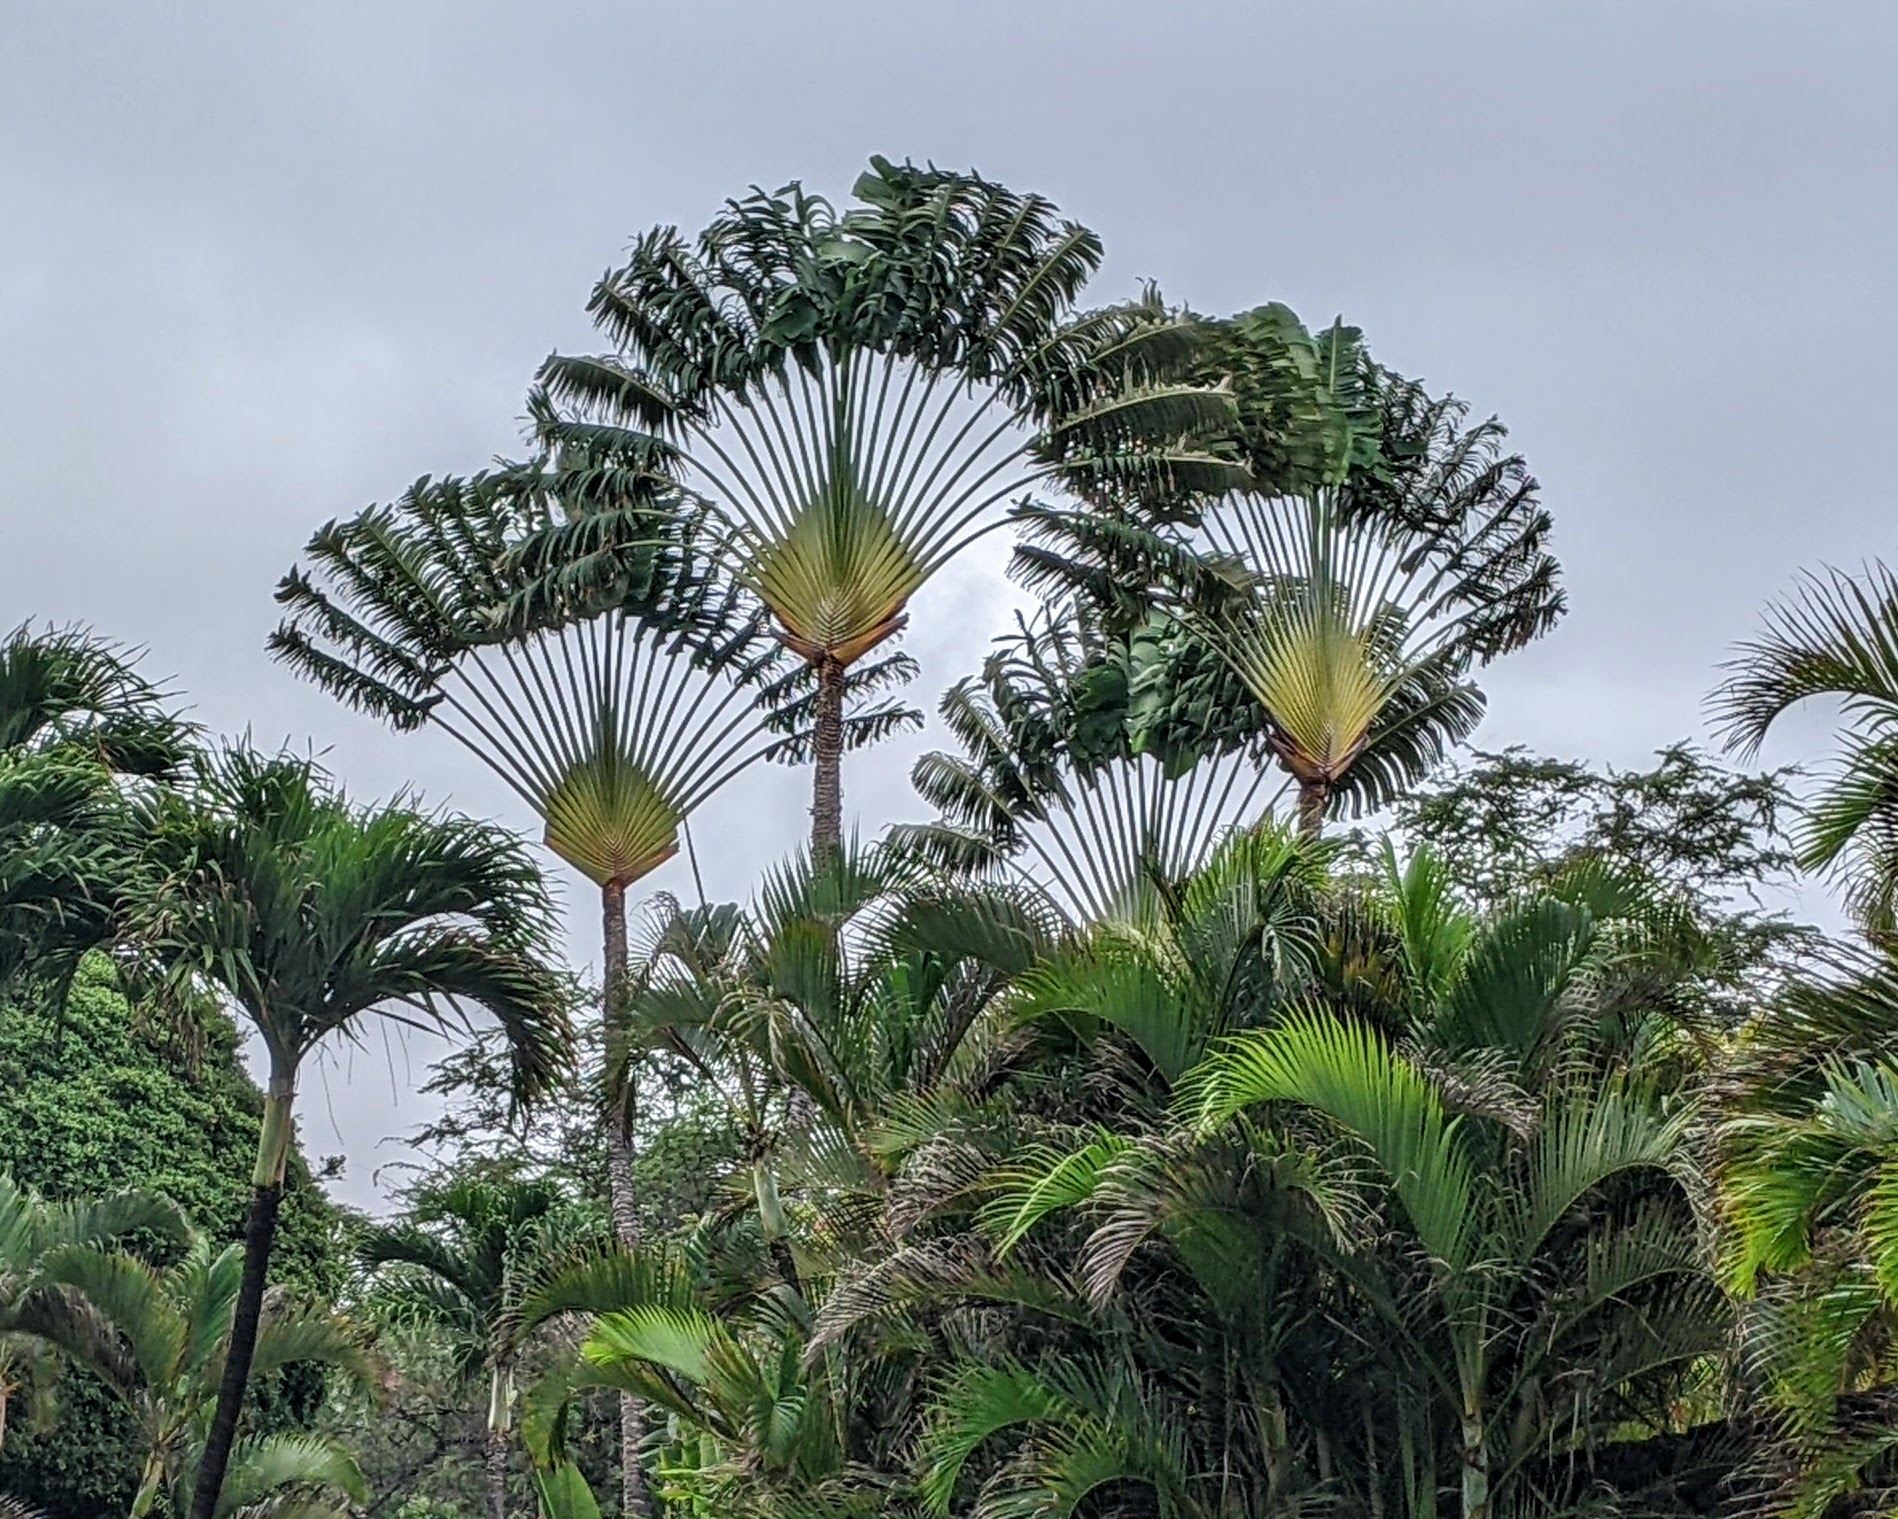 Huge tropical trees in a tropical forest